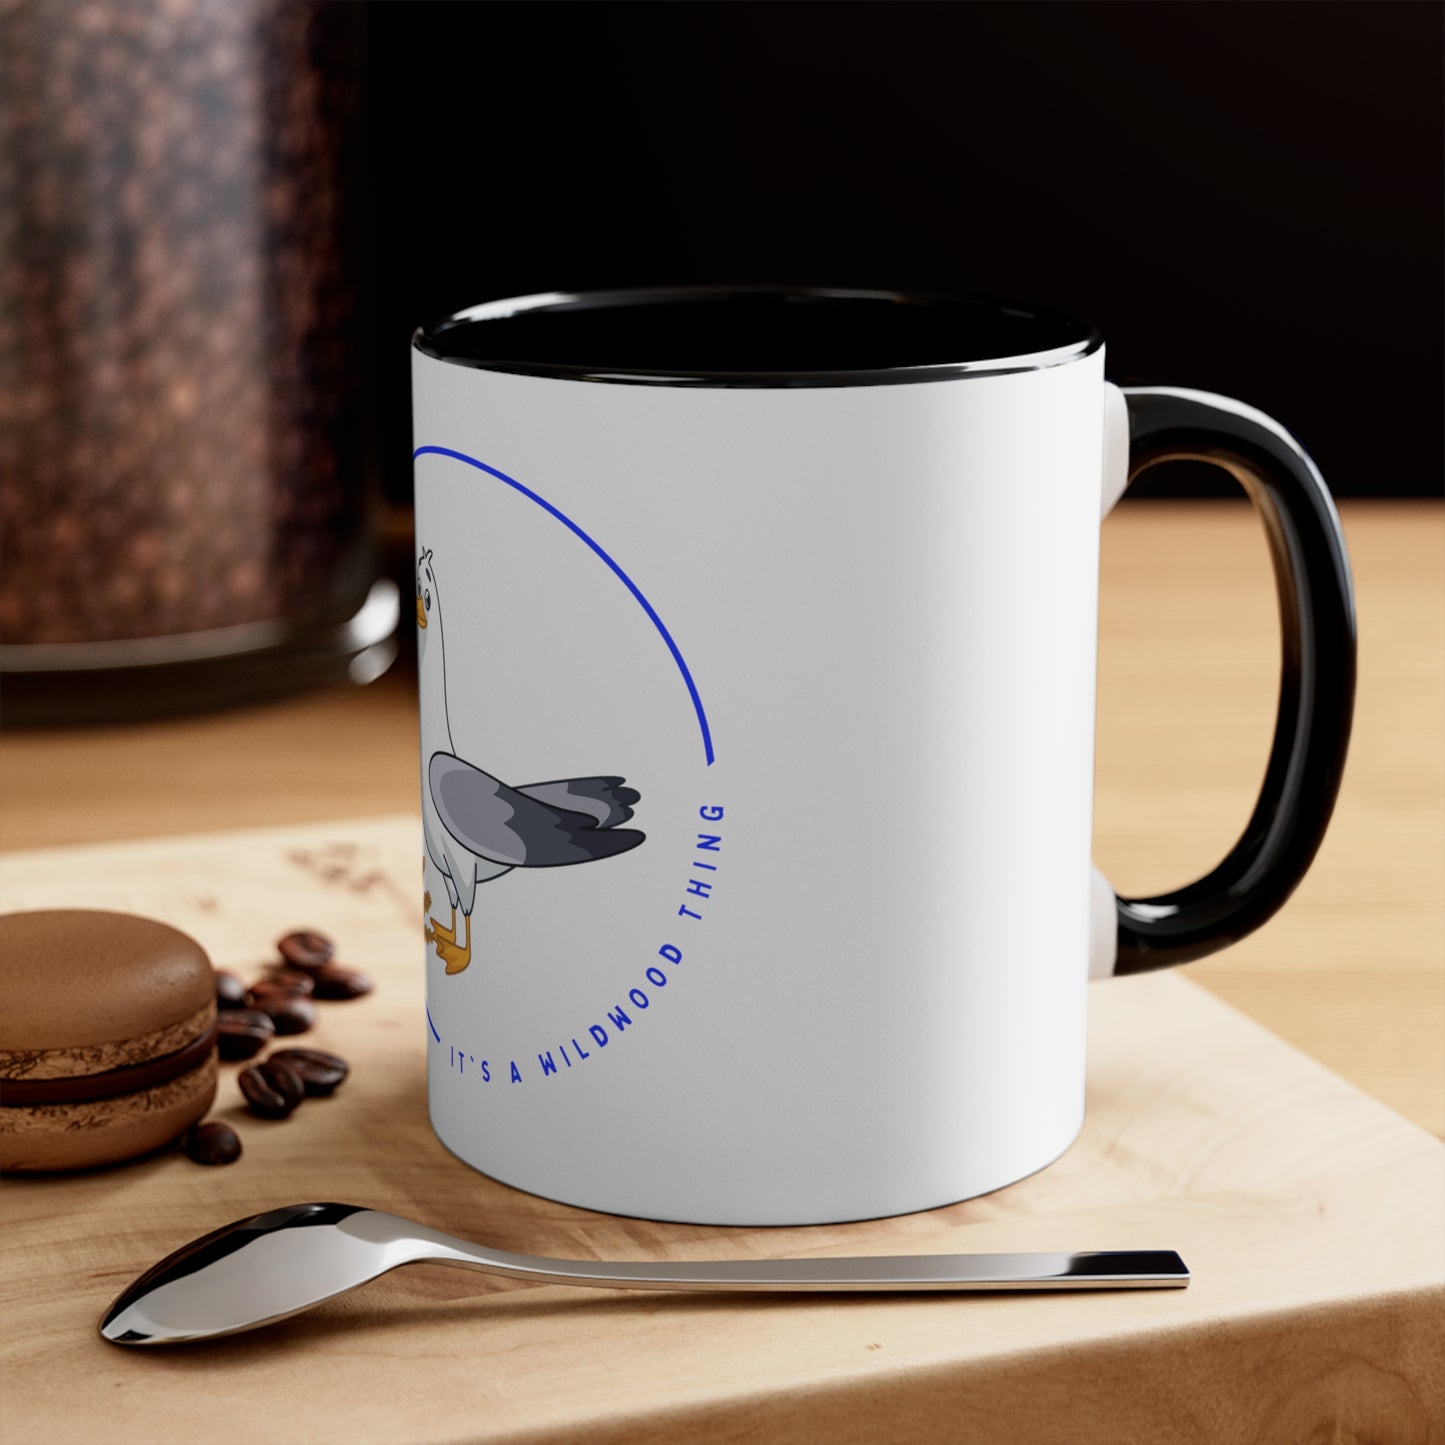 Wildwood Seagull Its a Philly Thing Hilarious Accent Coffee Mug, 11oz